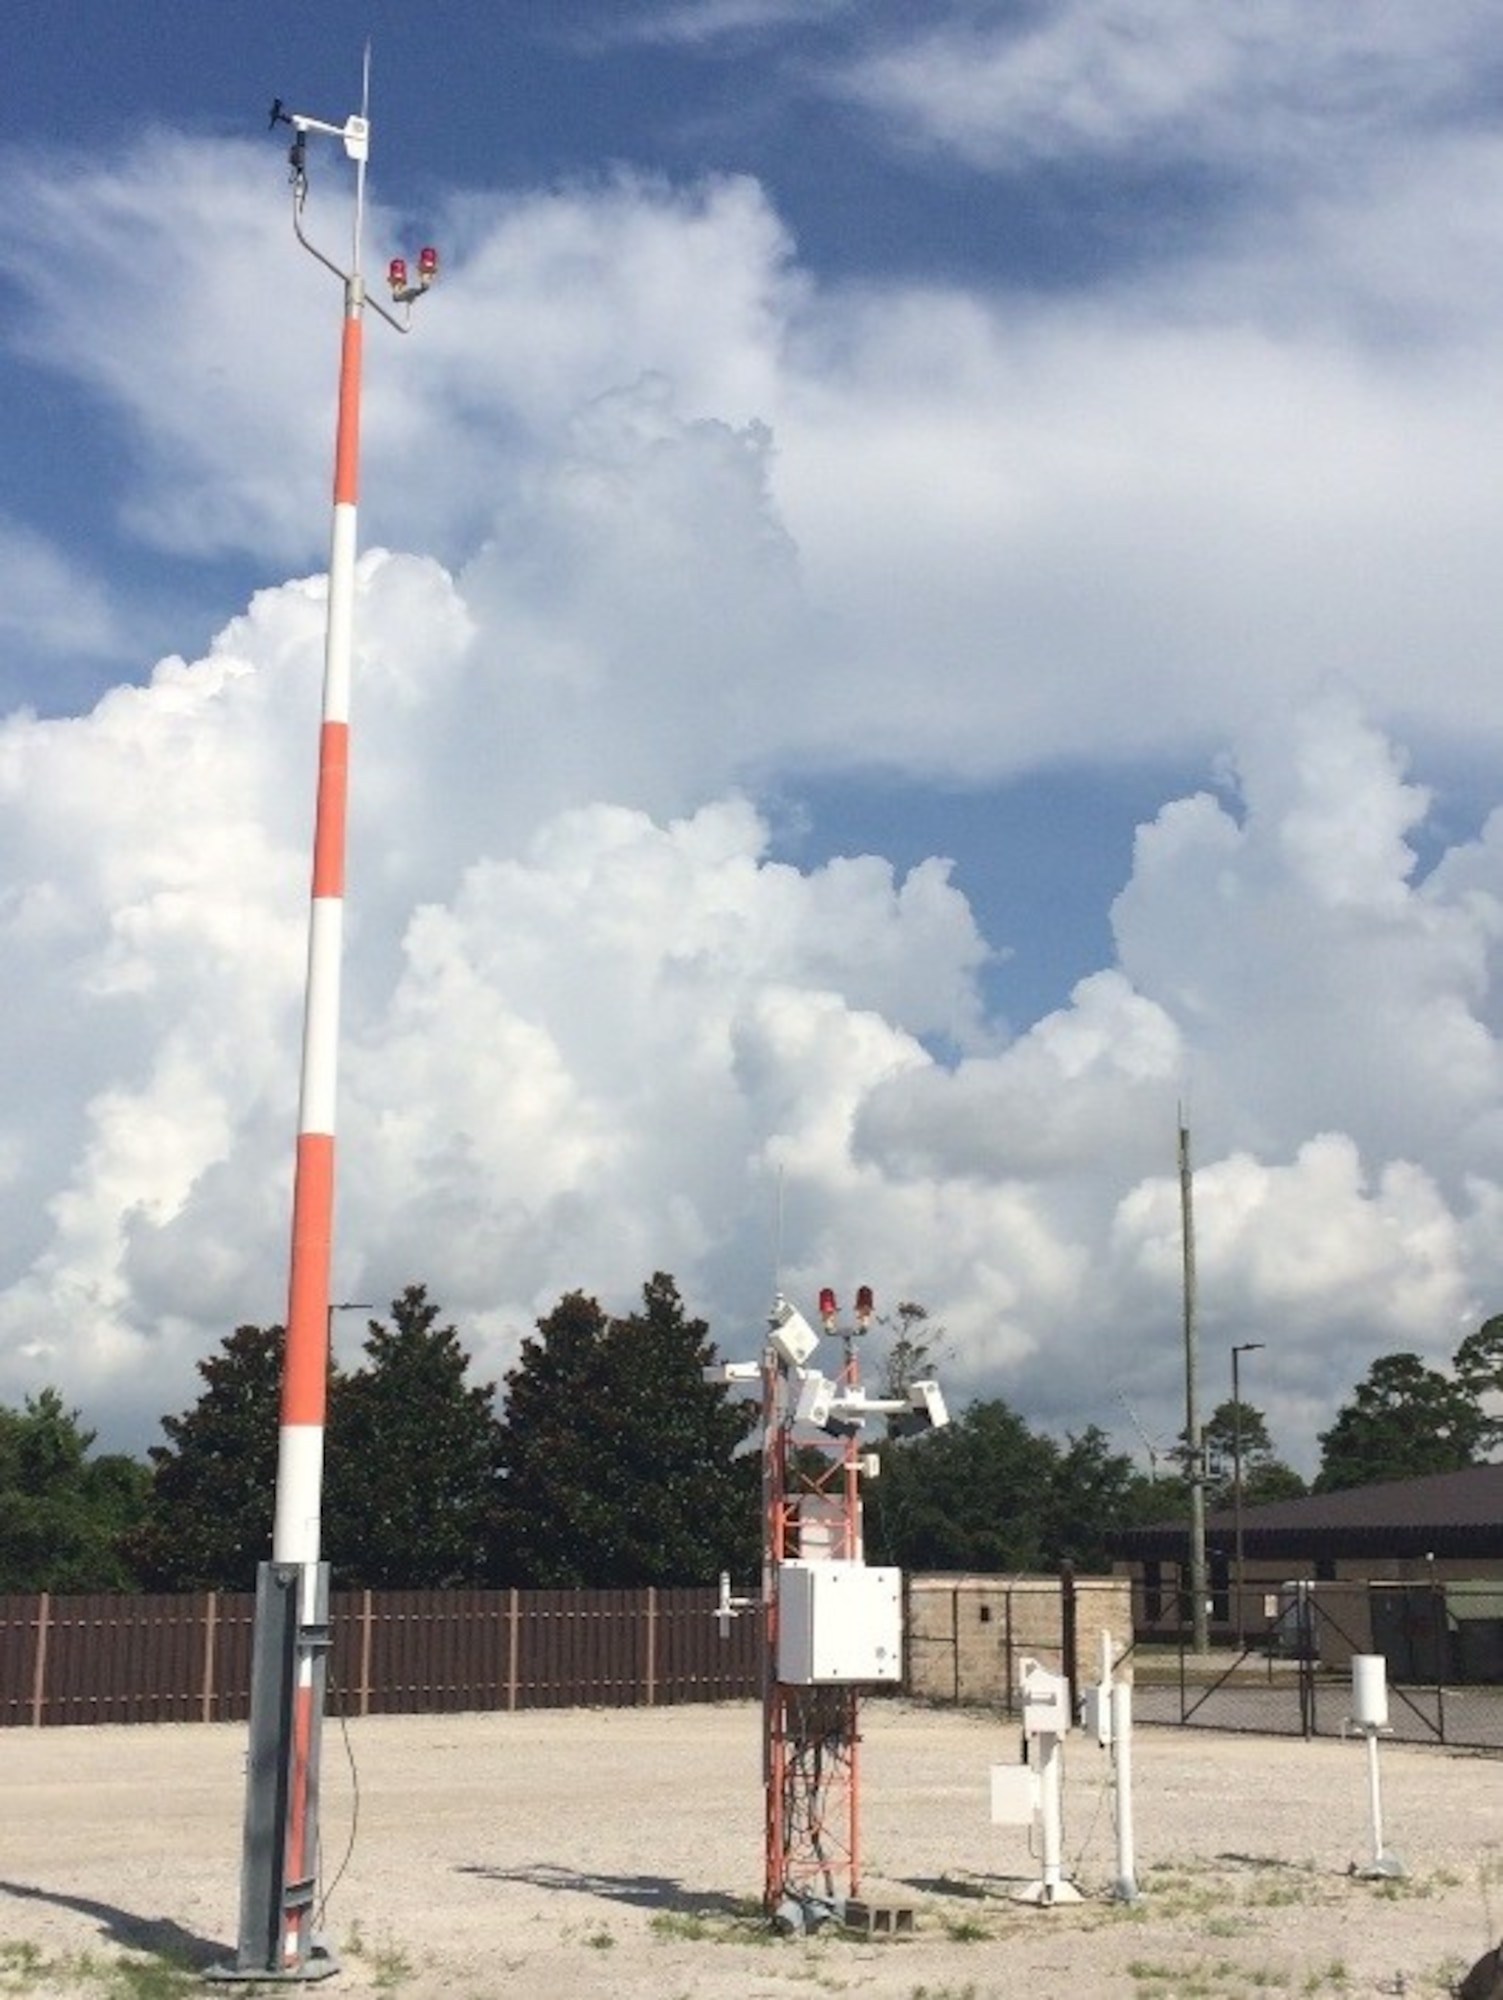 The AN/FMQ-19 is an integrated system of weather sensors that measure, collect, and disseminate meteorological data to help meteorologists, pilots, and flight dispatchers prepare and monitor weather forecasts, plan flight routes, and provide necessary information for safe takeoffs and landings.